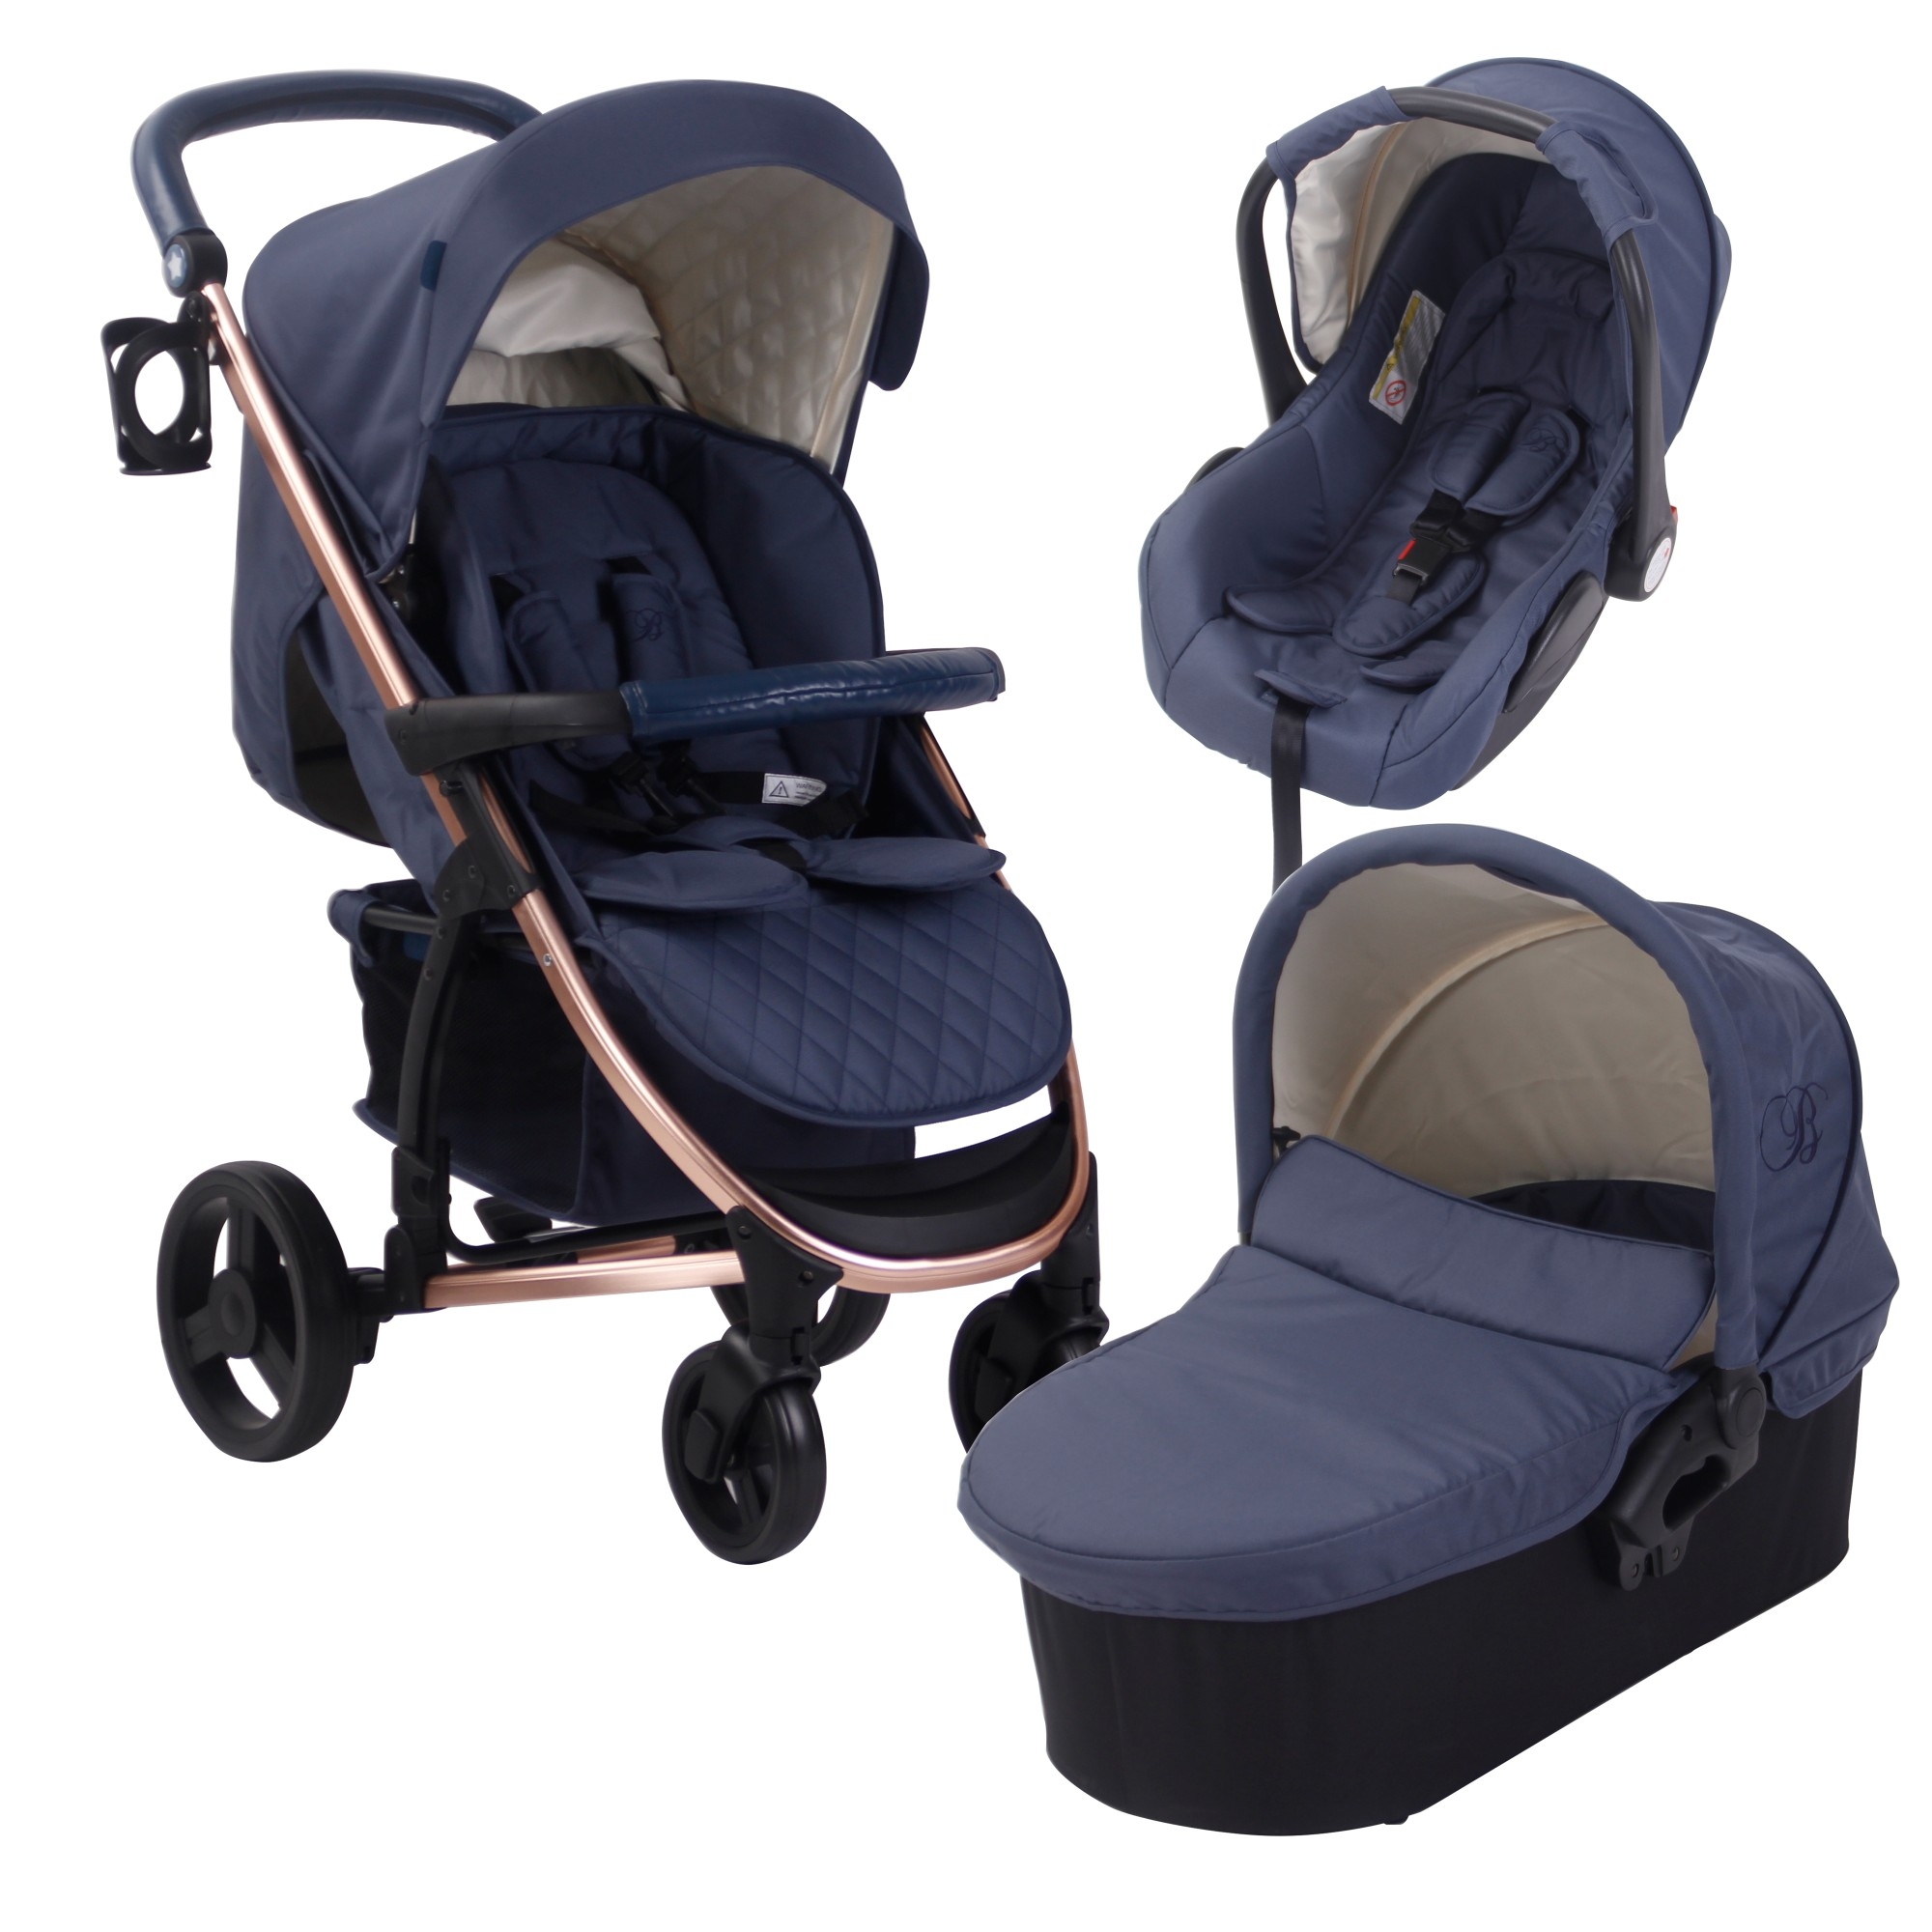 billie faiers travel system rose gold